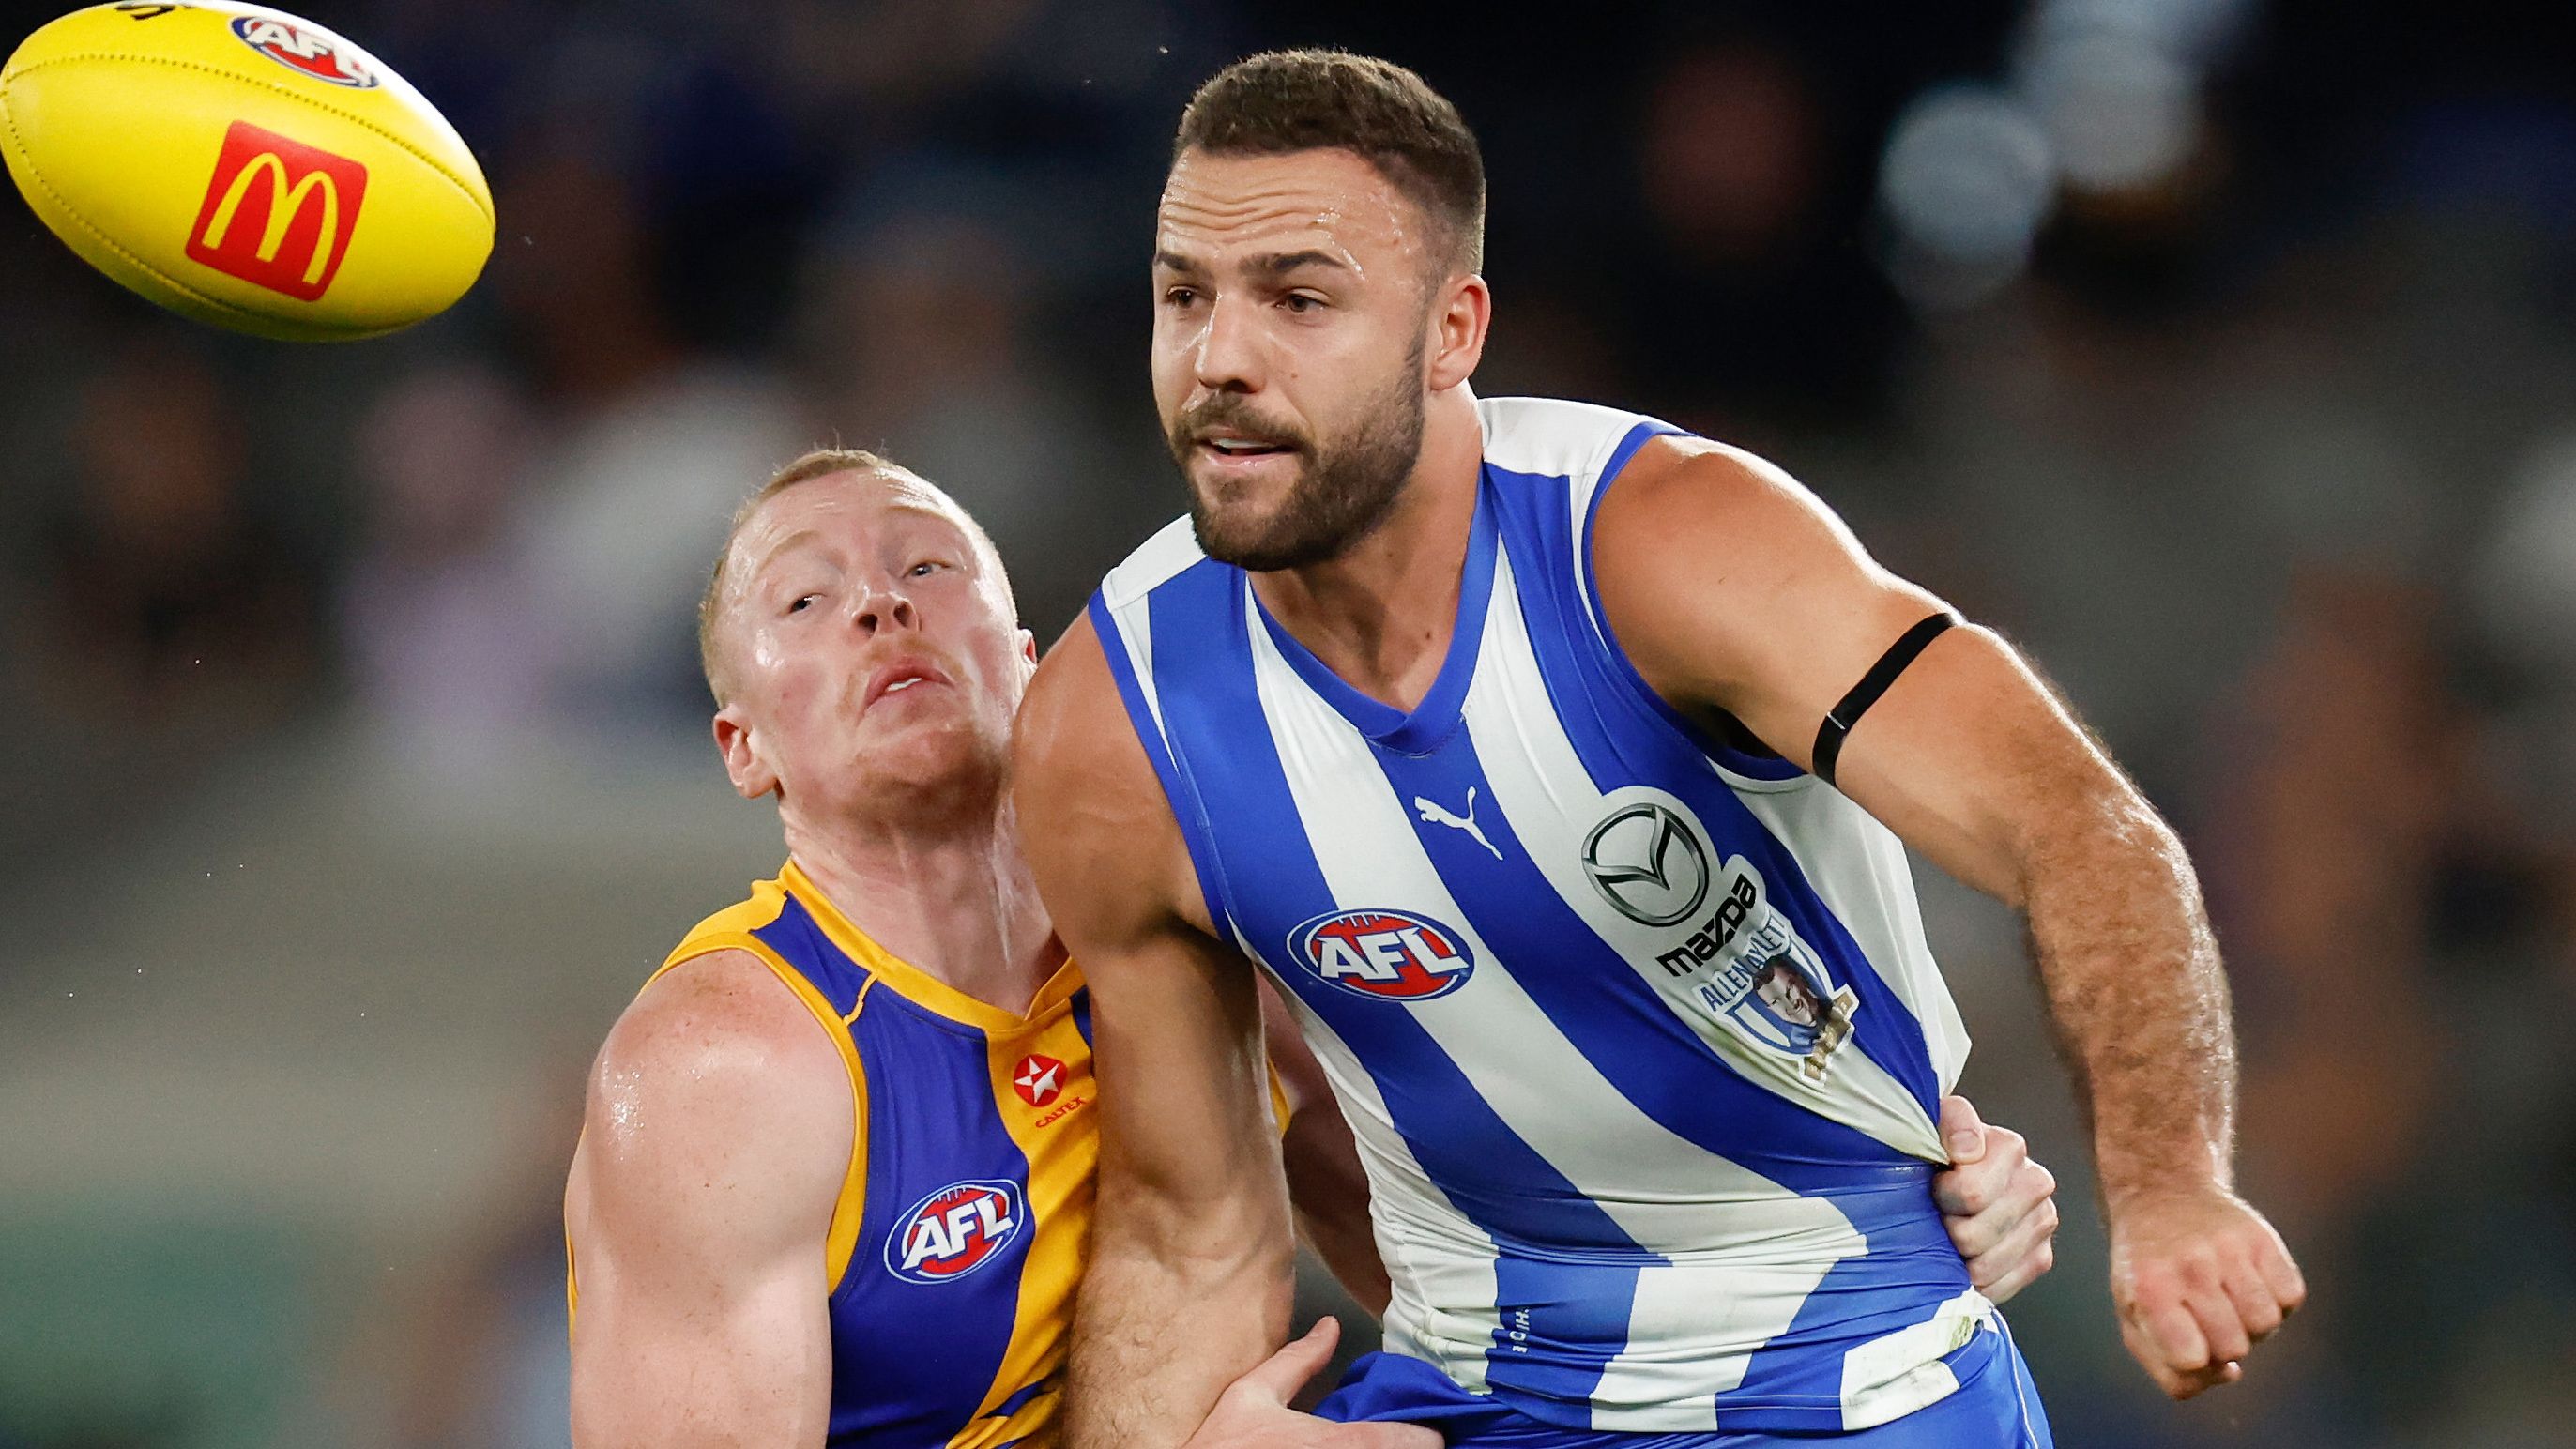 MELBOURNE, AUSTRALIA - MARCH 18: Griffin Logue of the Kangaroos is tackled by Bailey J. Williams of the Eagles during the 2023 AFL Round 01 match between the North Melbourne Kangaroos and the West Coast Eagles at Marvel Stadium on March 18, 2023 in Melbourne, Australia. (Photo by Michael Willson/AFL Photos)